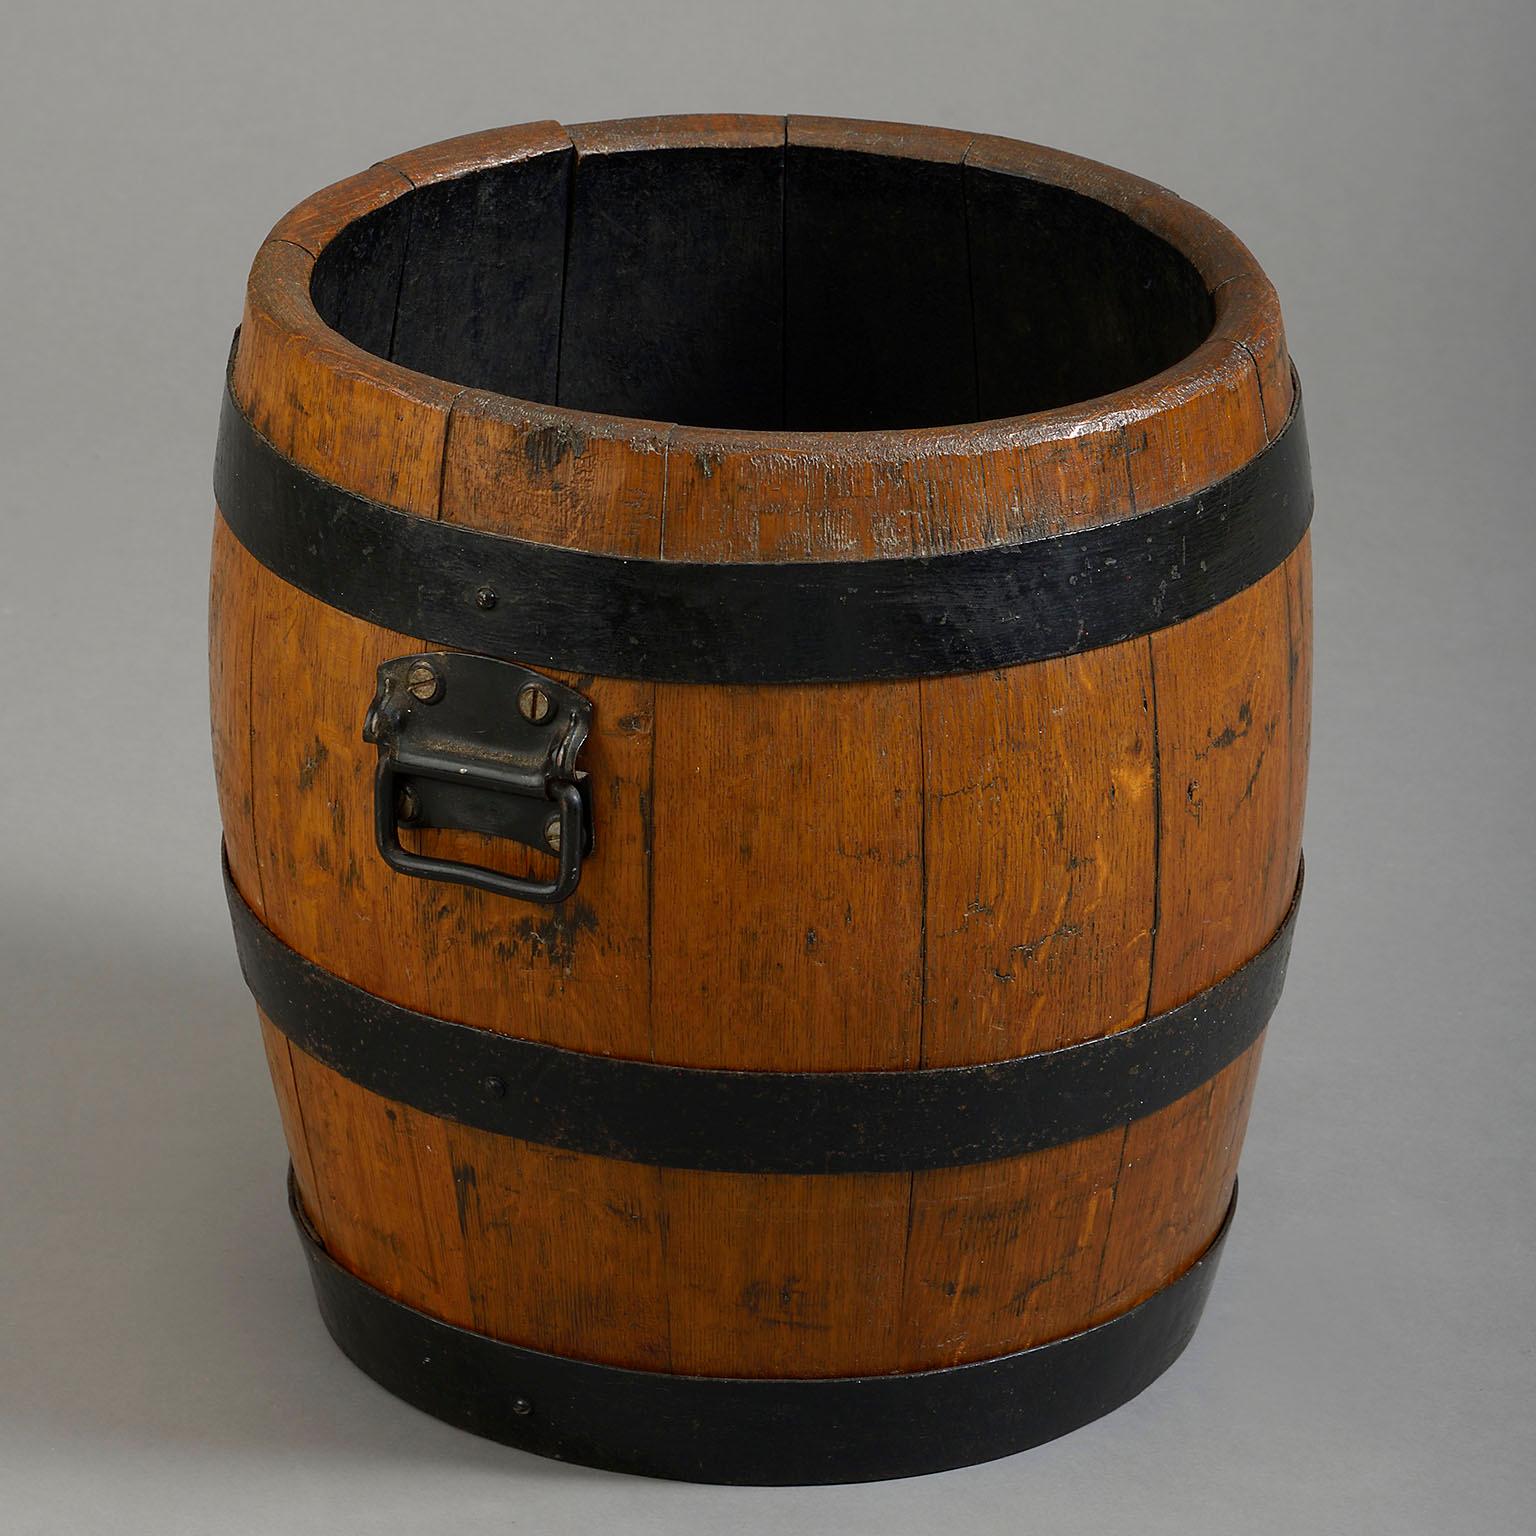 A late nineteenth century iron coopered oak barrel. Formerly a beer barrel, the front and underside carved Courage & Co Alton.

Circa 1890 England

Dimensions: 17 W x 16 D x 17 H inches
43 W x 40.5 D x 43 H cm.